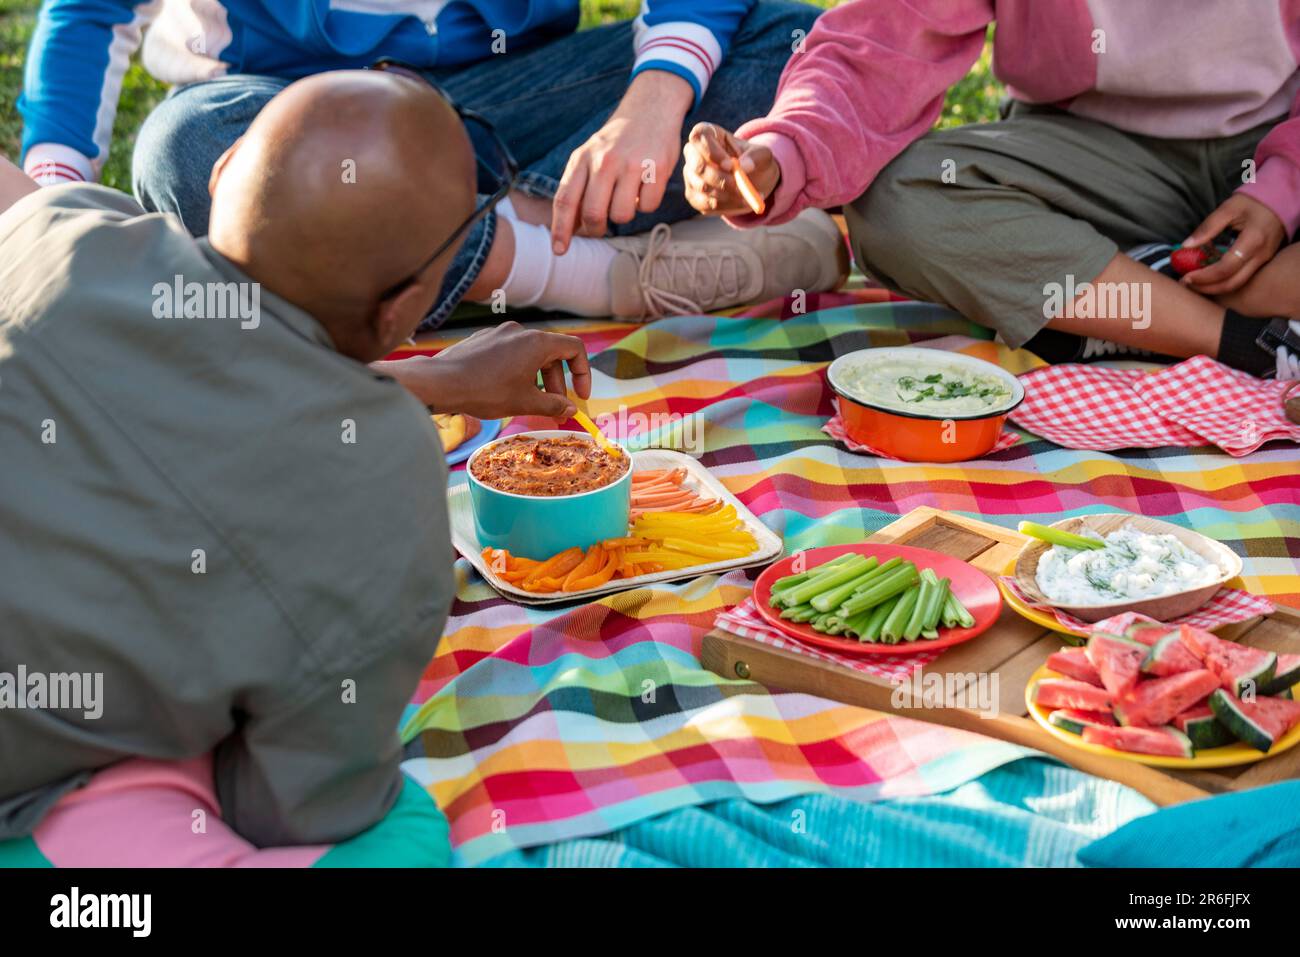 people having good time at a picnic with many vegan plates Stock Photo